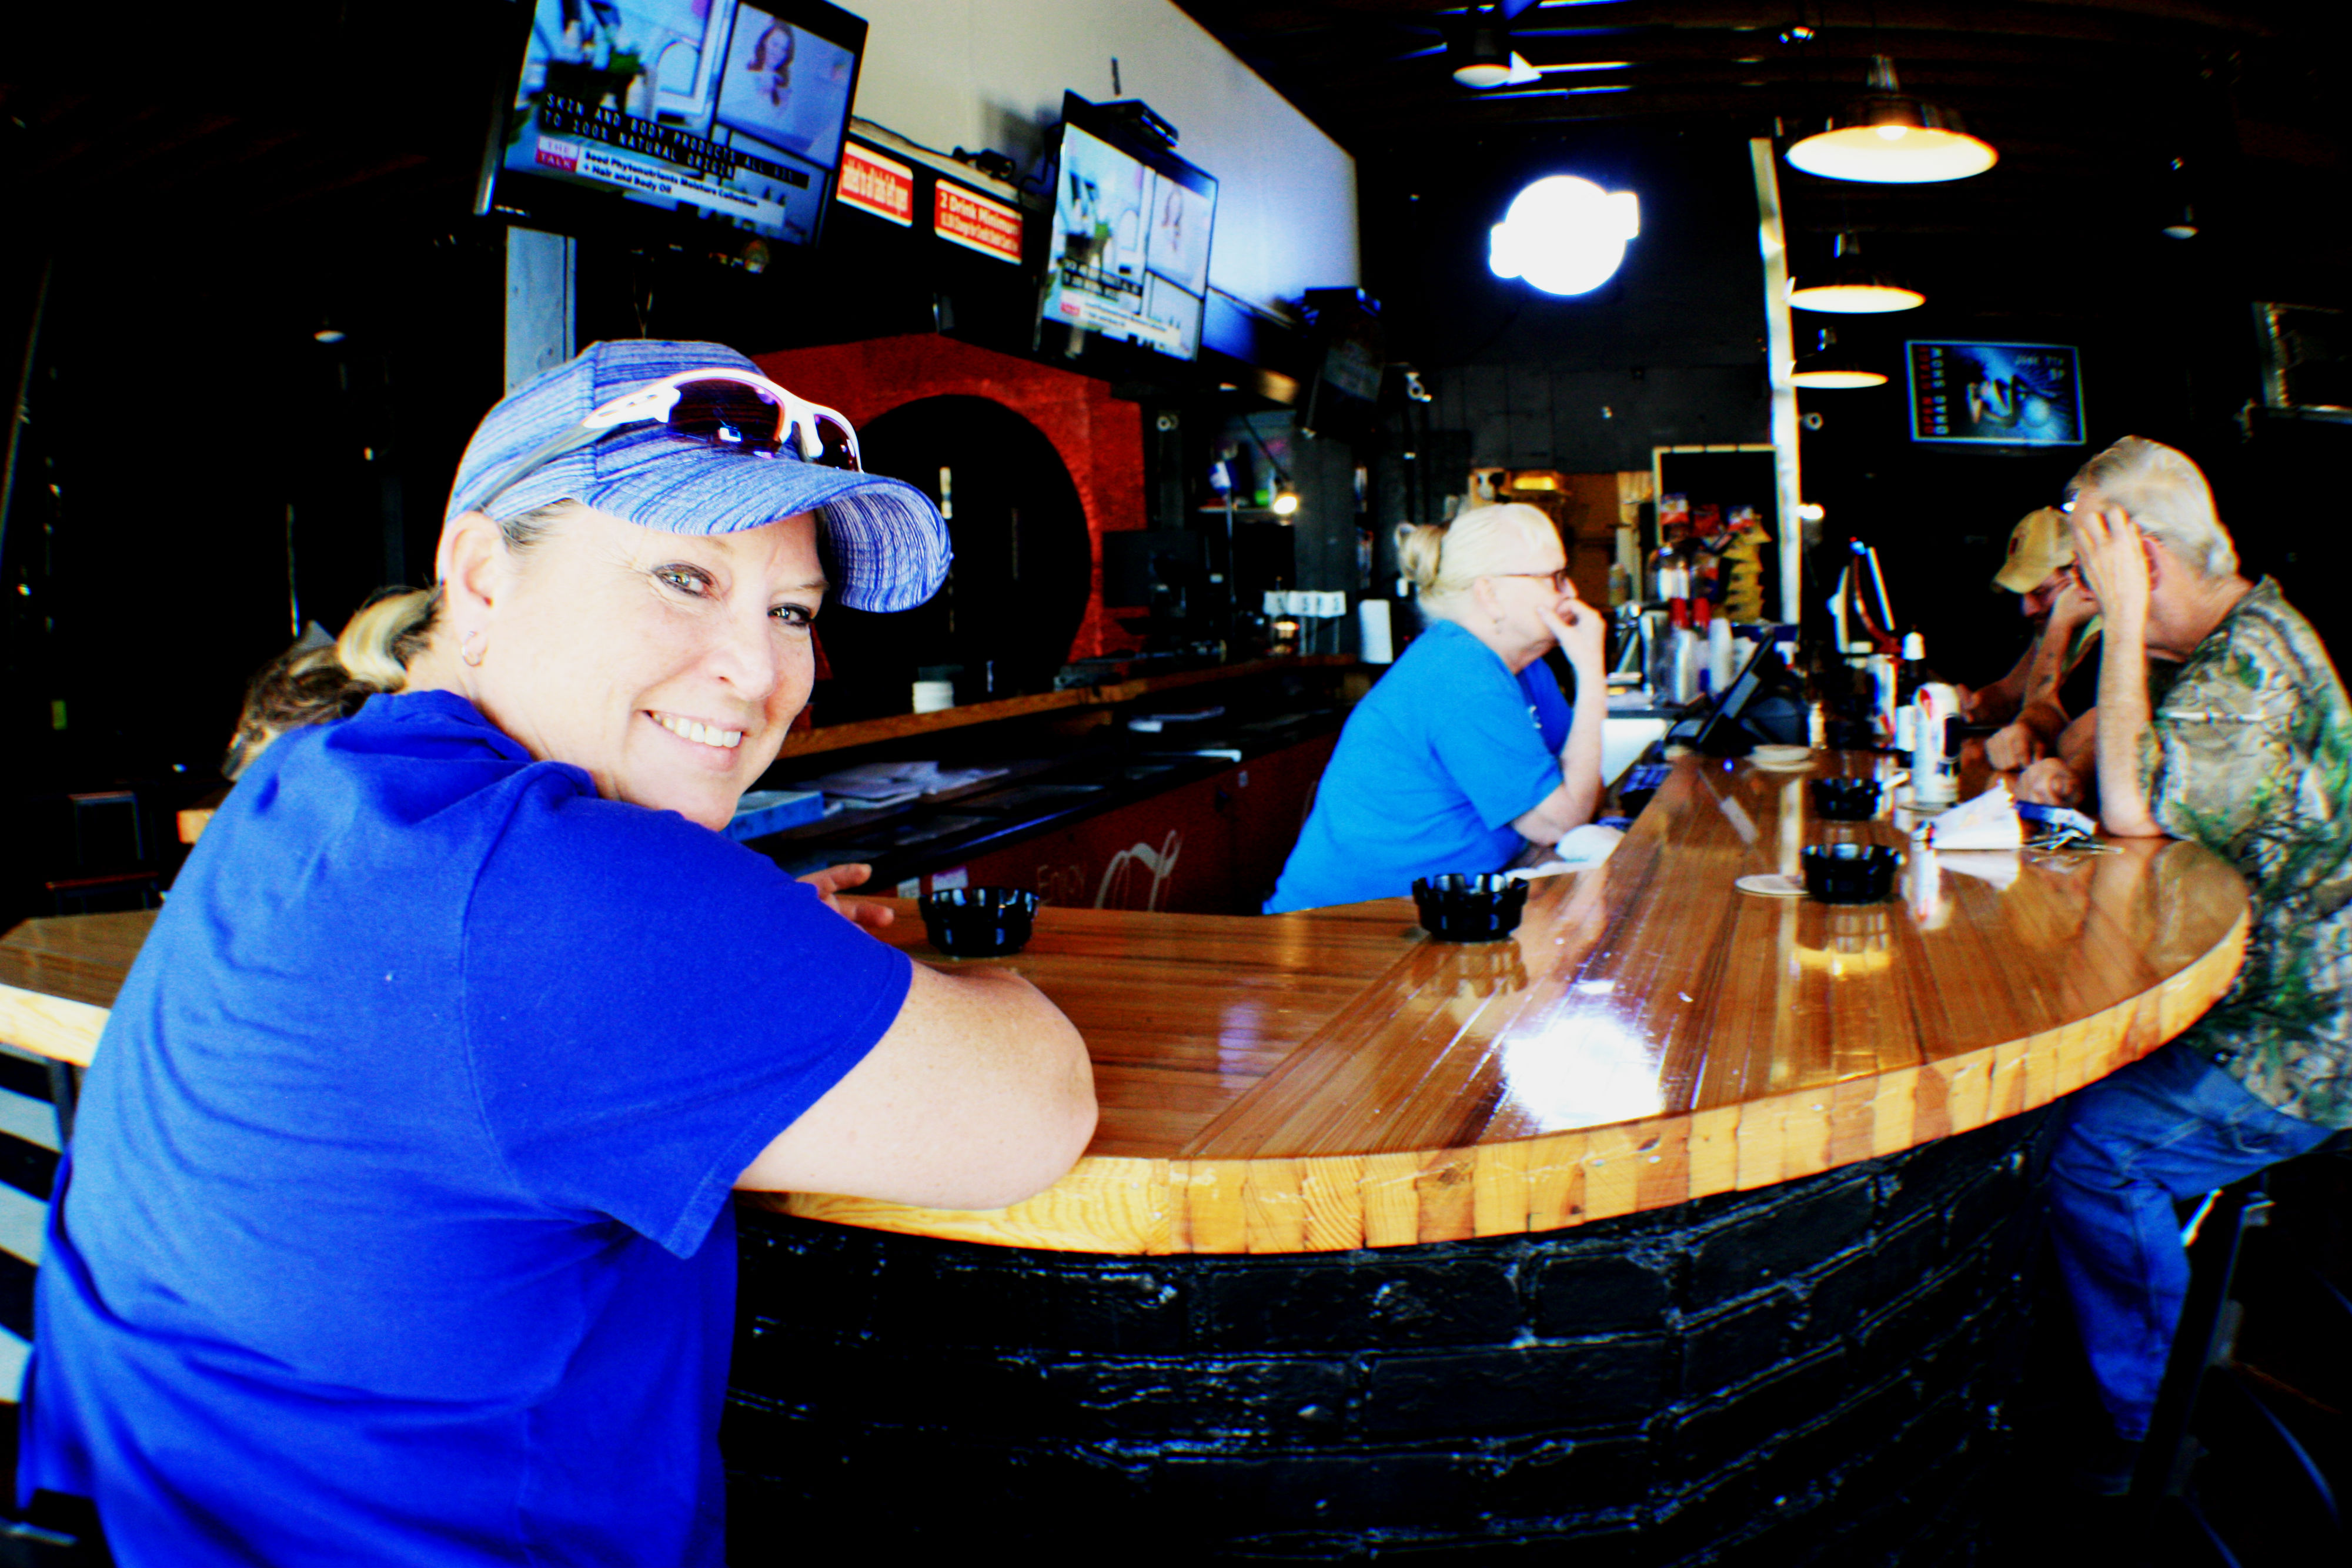 Tami Montgomery, owner of Dru's Bar, sits at the newly remodeled bar and chats with regulars after completing some chores around the business. The location, 1474 Madison Avenue, has been home to a number of LGBT bars since the 1970s. (Cole Bradley)